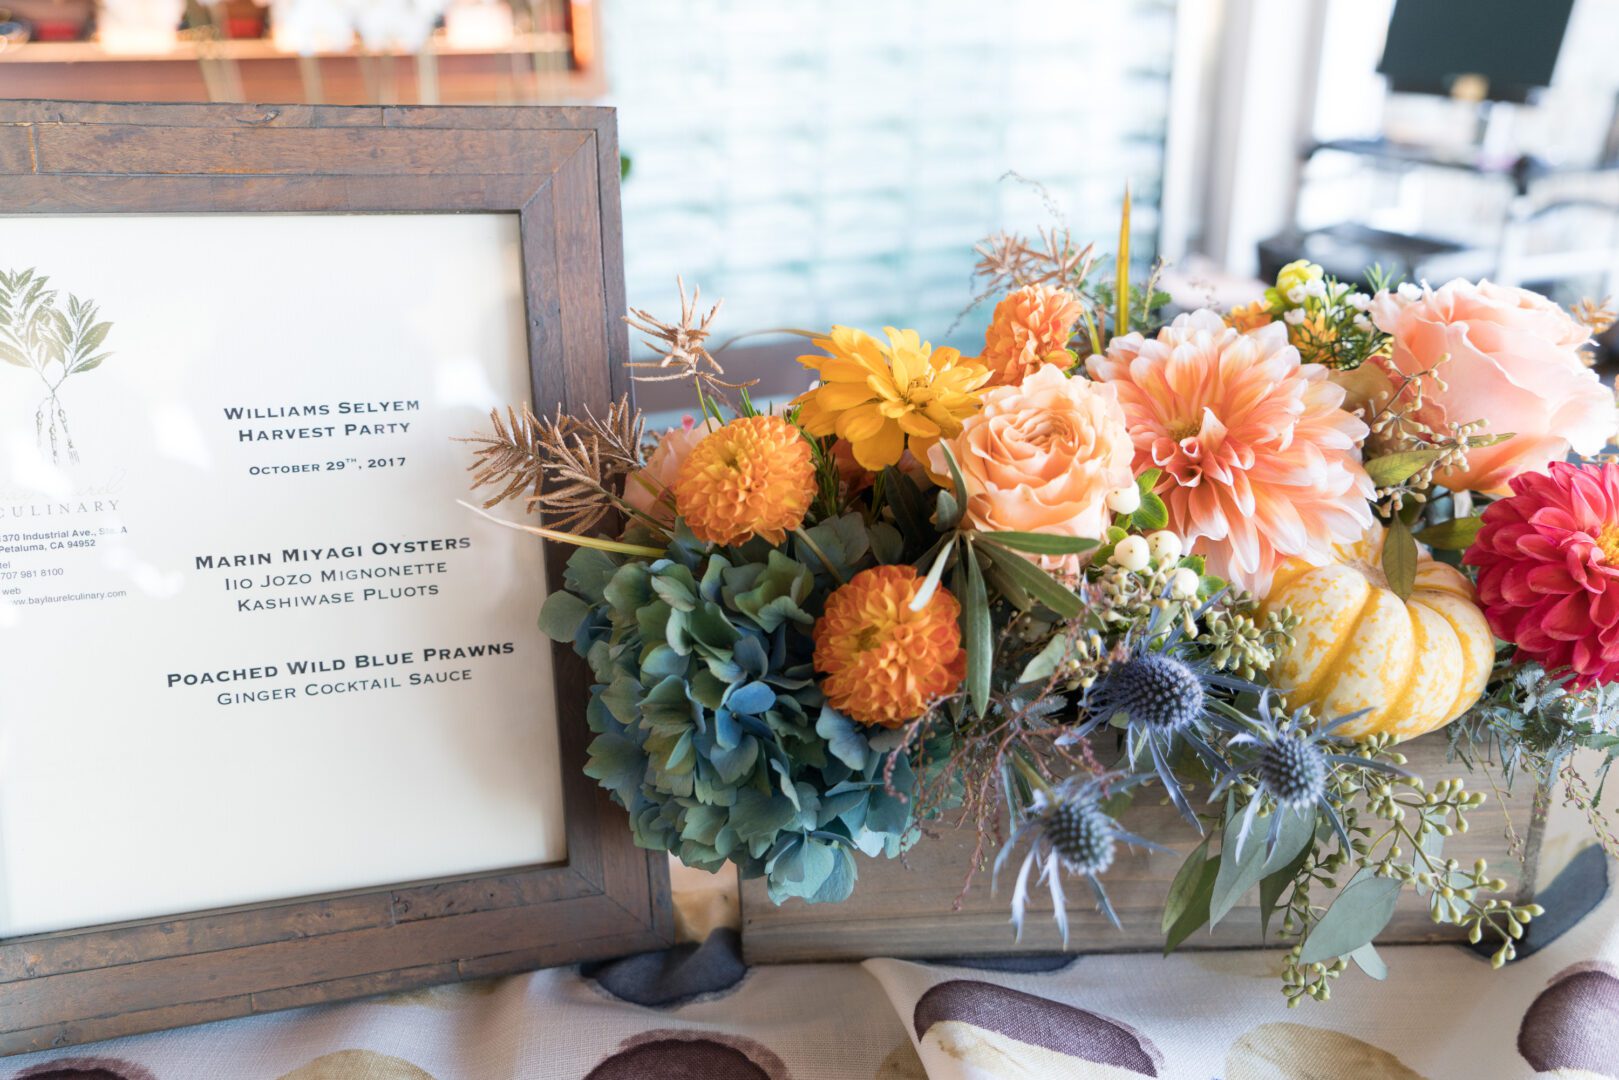 A table with flowers and a framed picture.